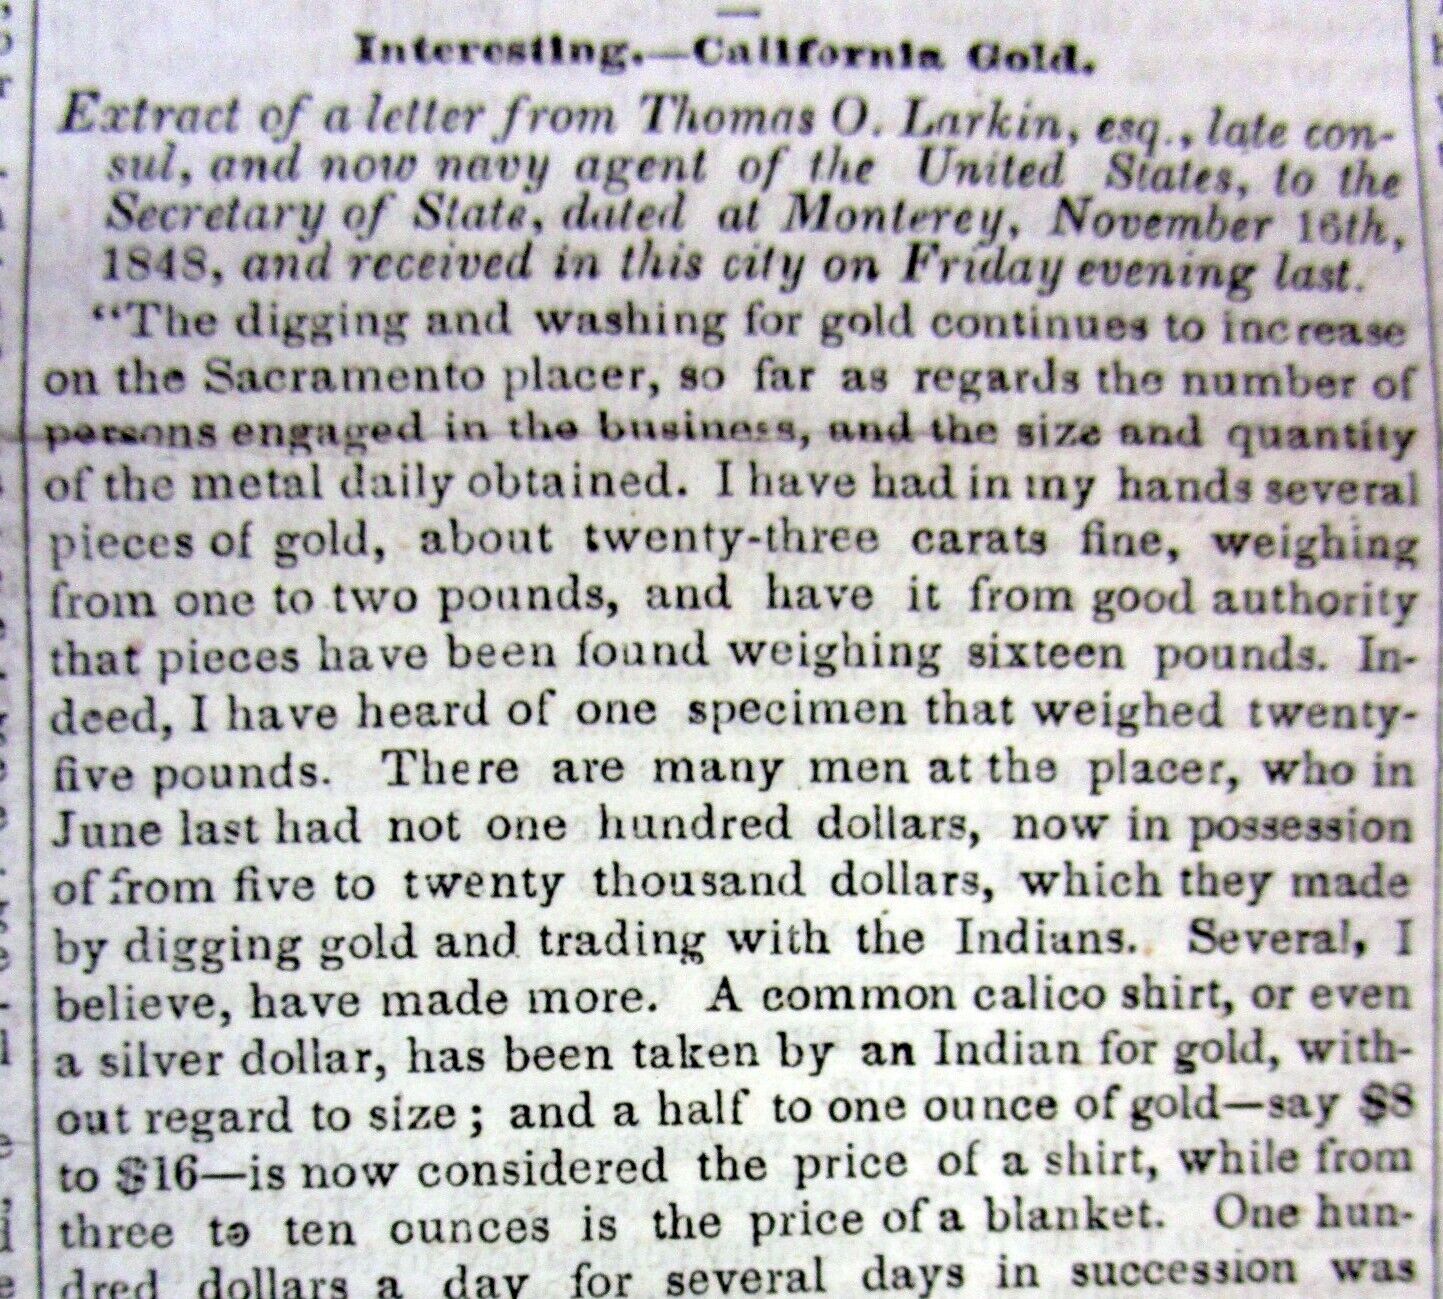 2 1849 newspapers GOLD IS DISCOVERED in CALIFORNIA & the CA GOLD RUSH BEGINS